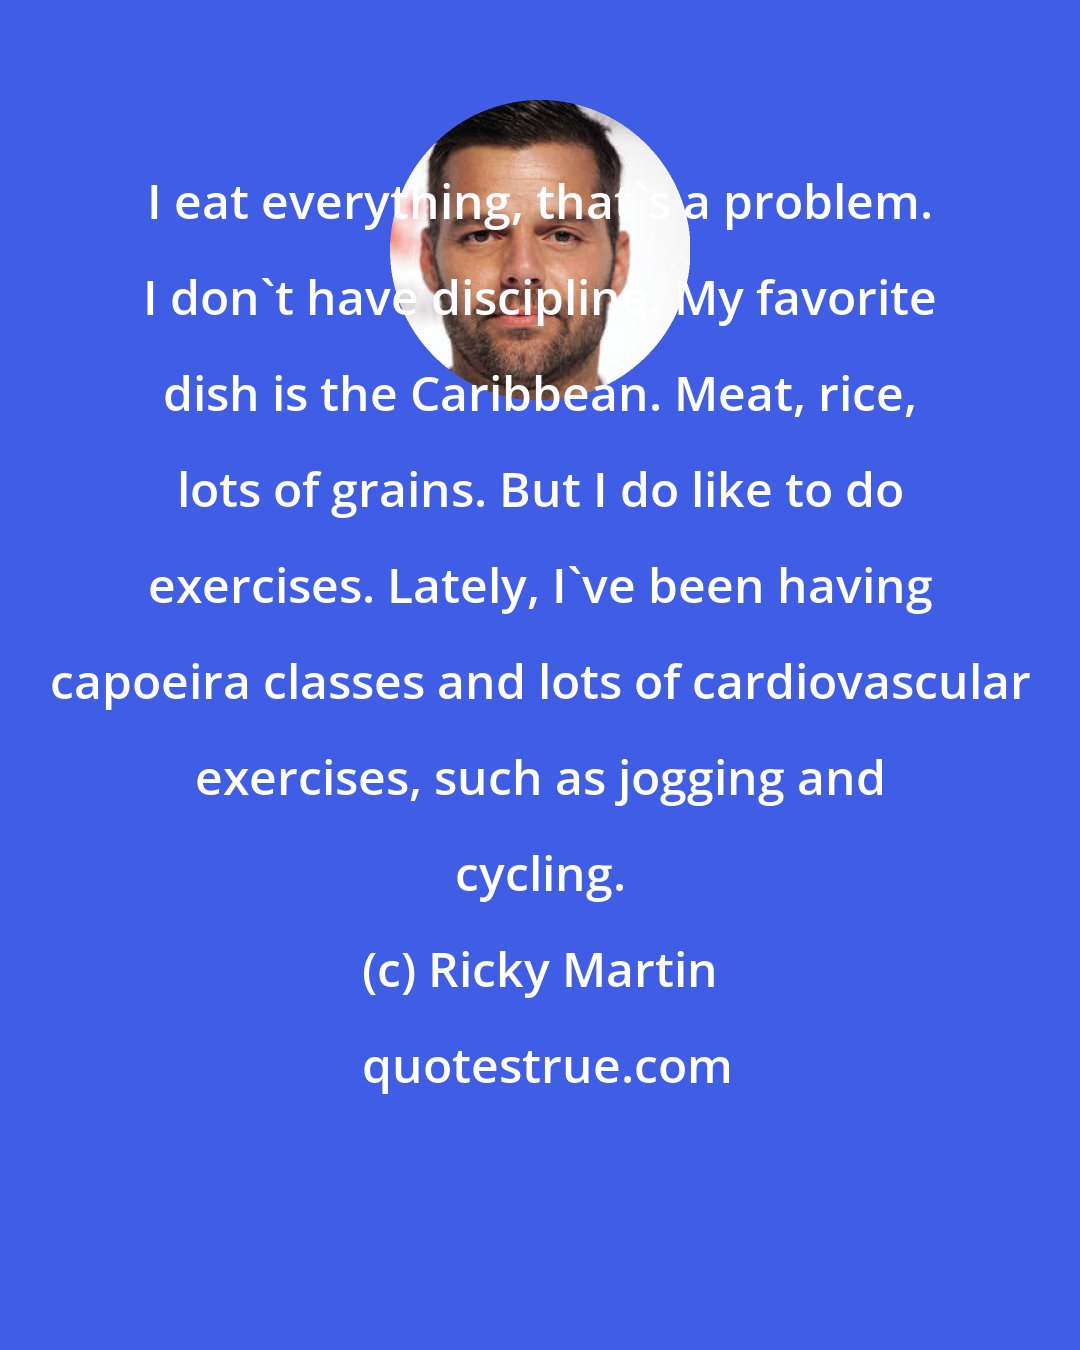 Ricky Martin: I eat everything, that's a problem. I don't have discipline. My favorite dish is the Caribbean. Meat, rice, lots of grains. But I do like to do exercises. Lately, I've been having capoeira classes and lots of cardiovascular exercises, such as jogging and cycling.